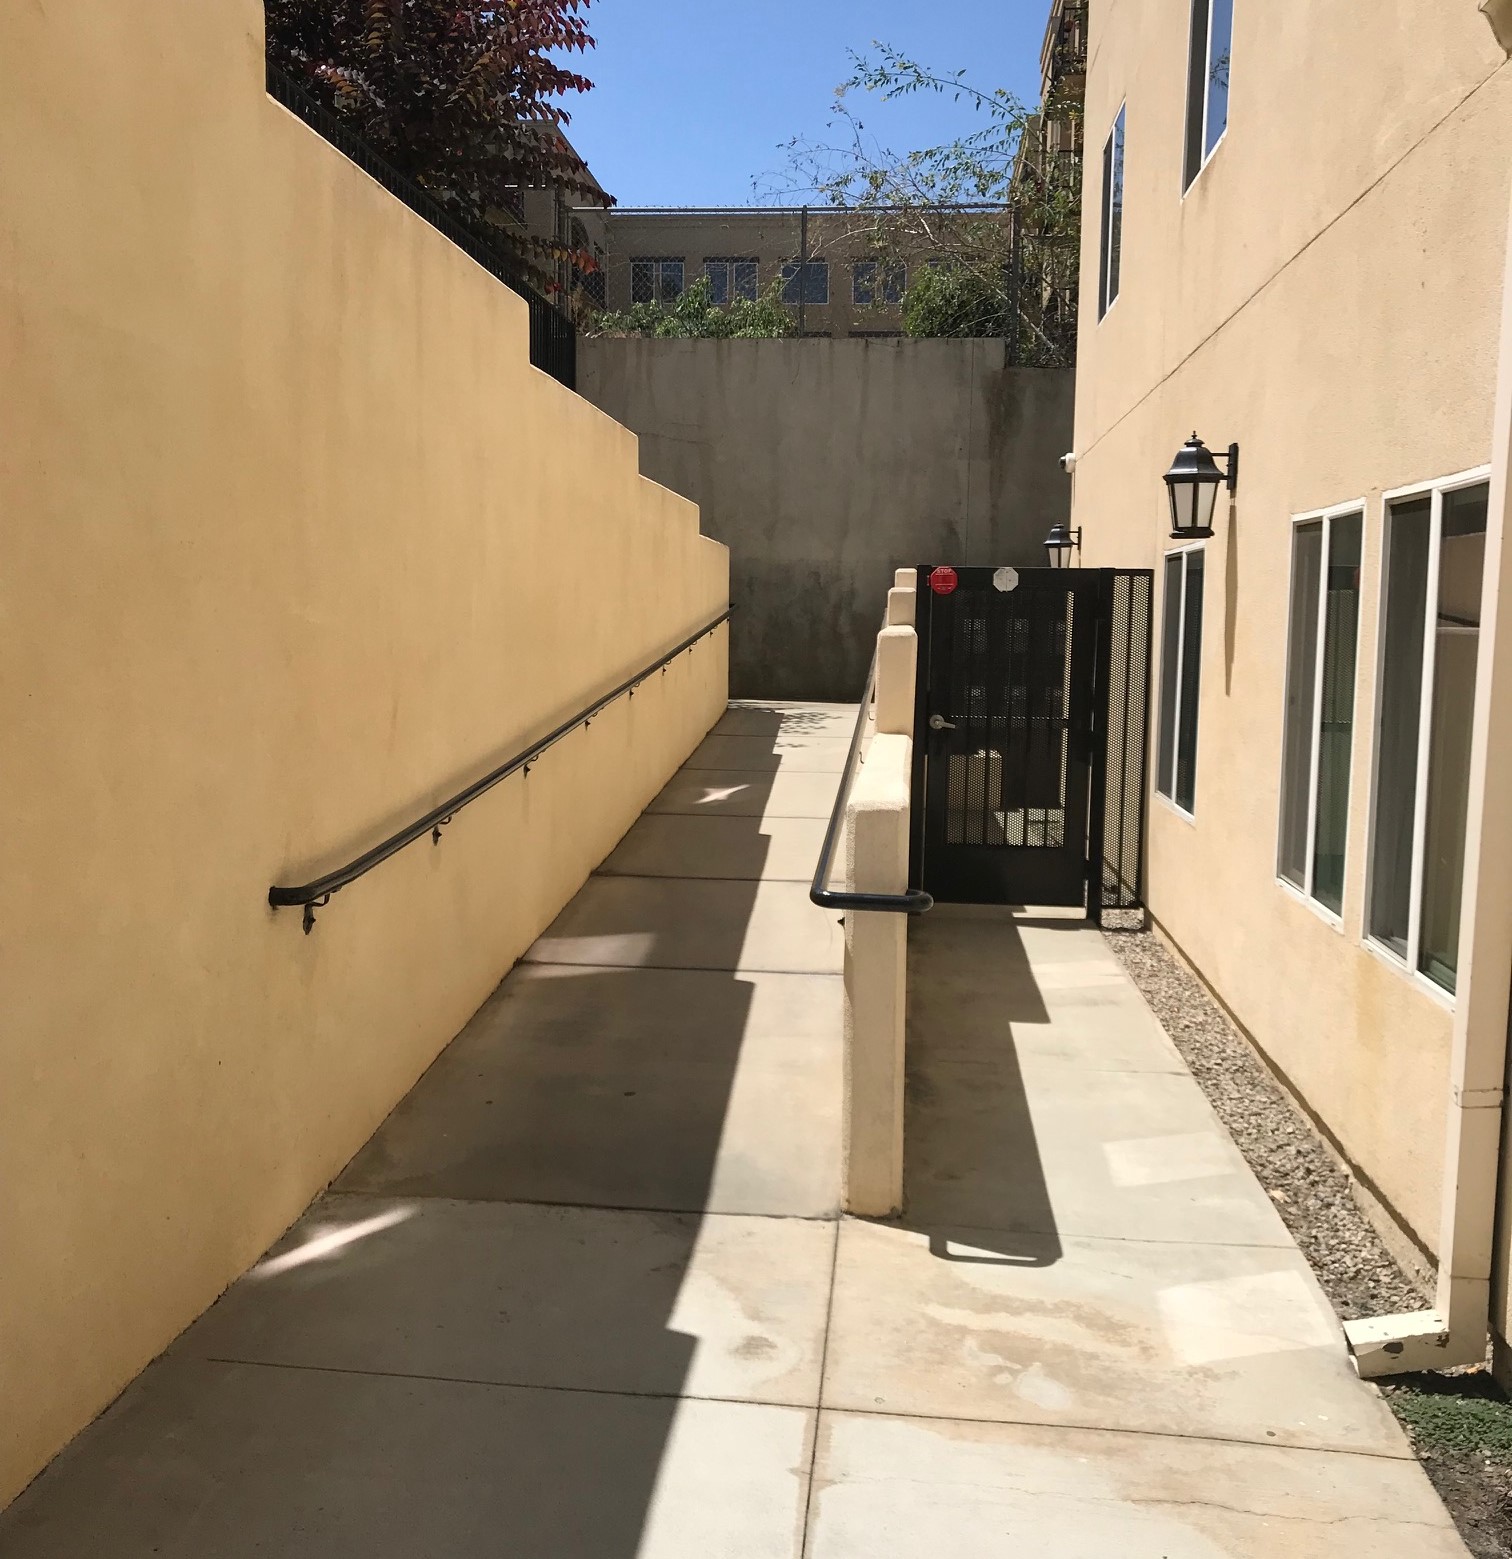 Exterior view of the a ramp leading to a gated entrance to Lorena Terrace.